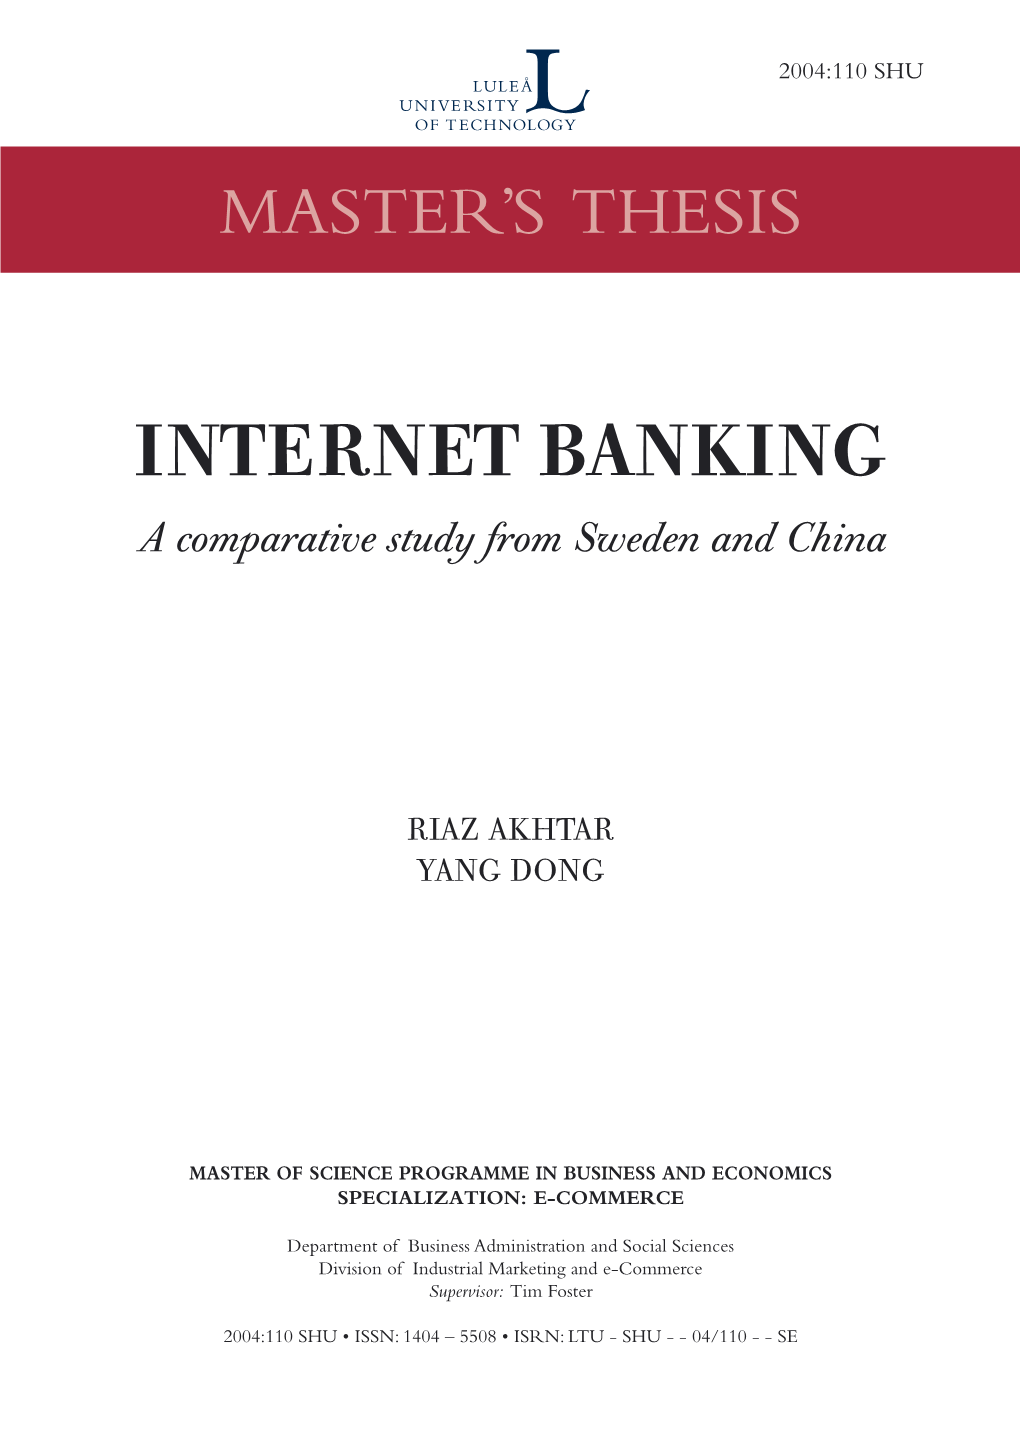 INTERNET BANKING a Comparative Study from Sweden and China